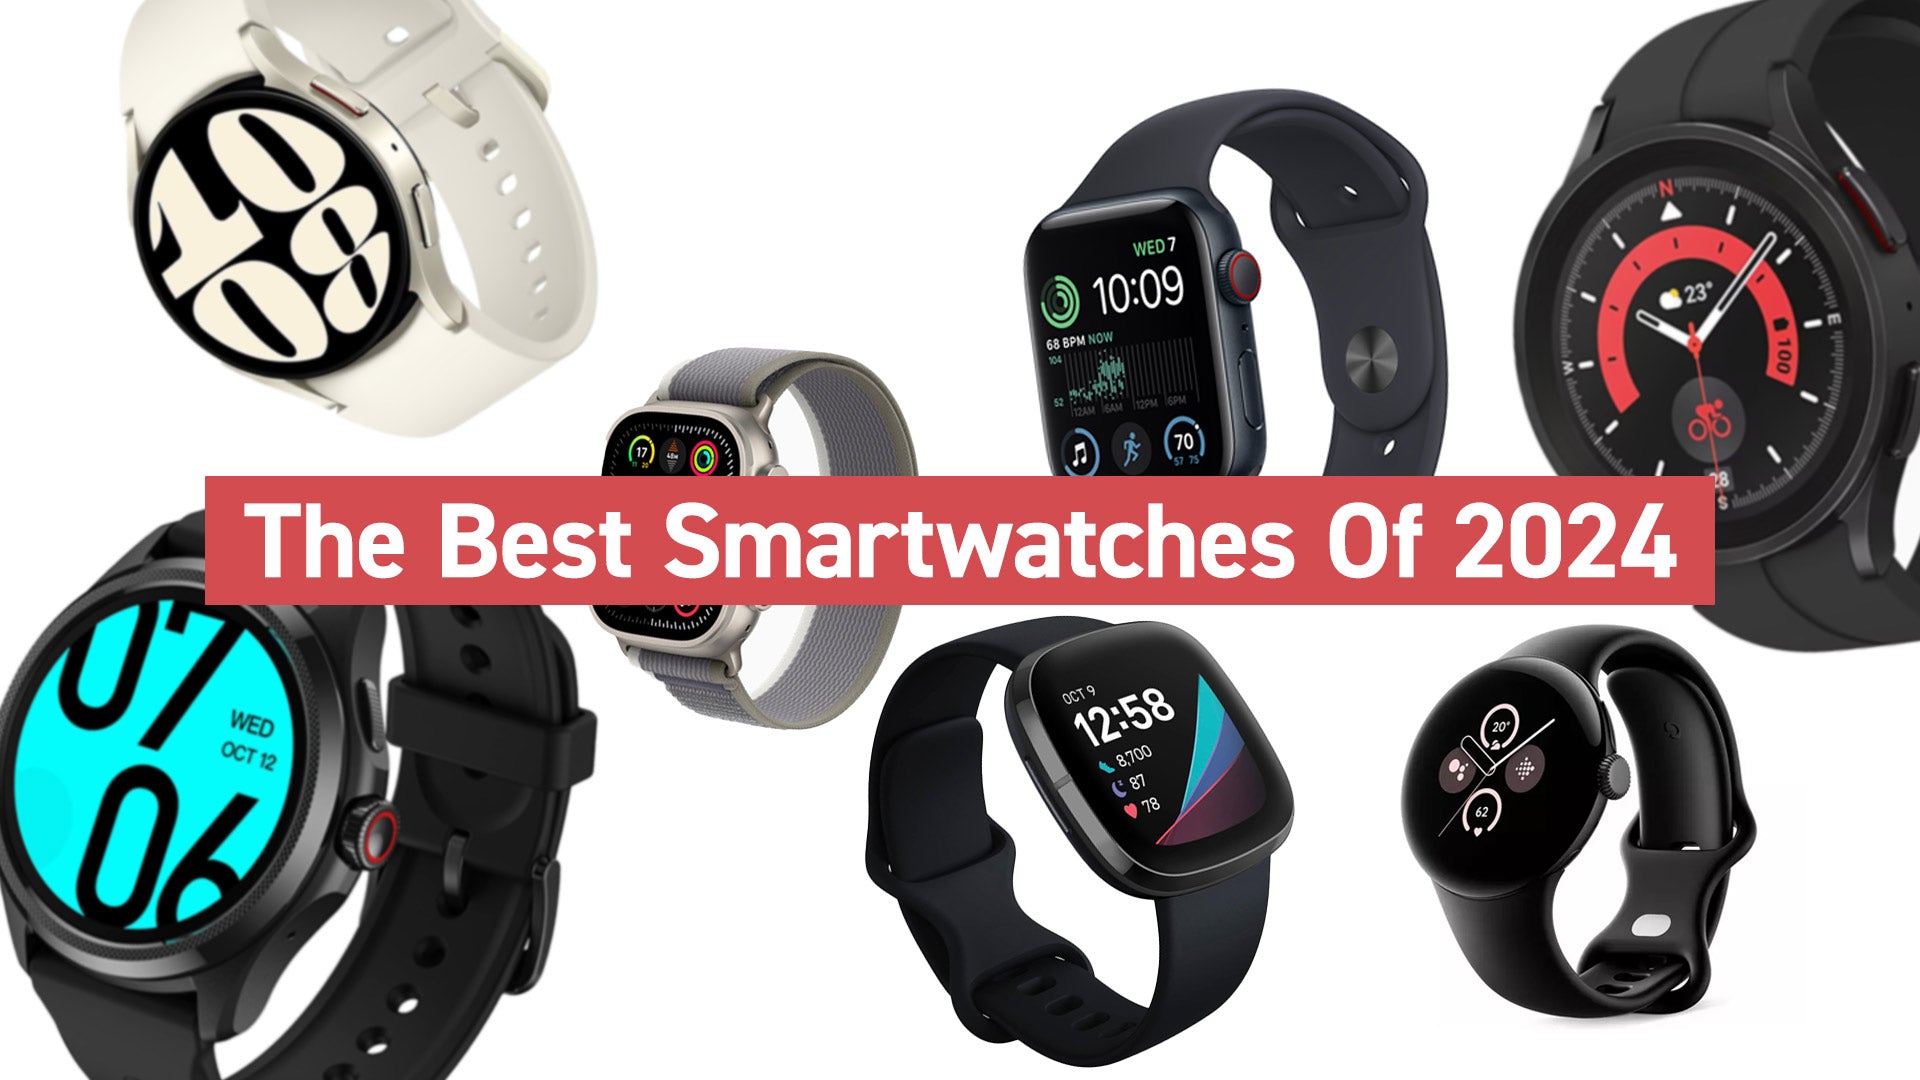 The Best Smartwatches Of 2024